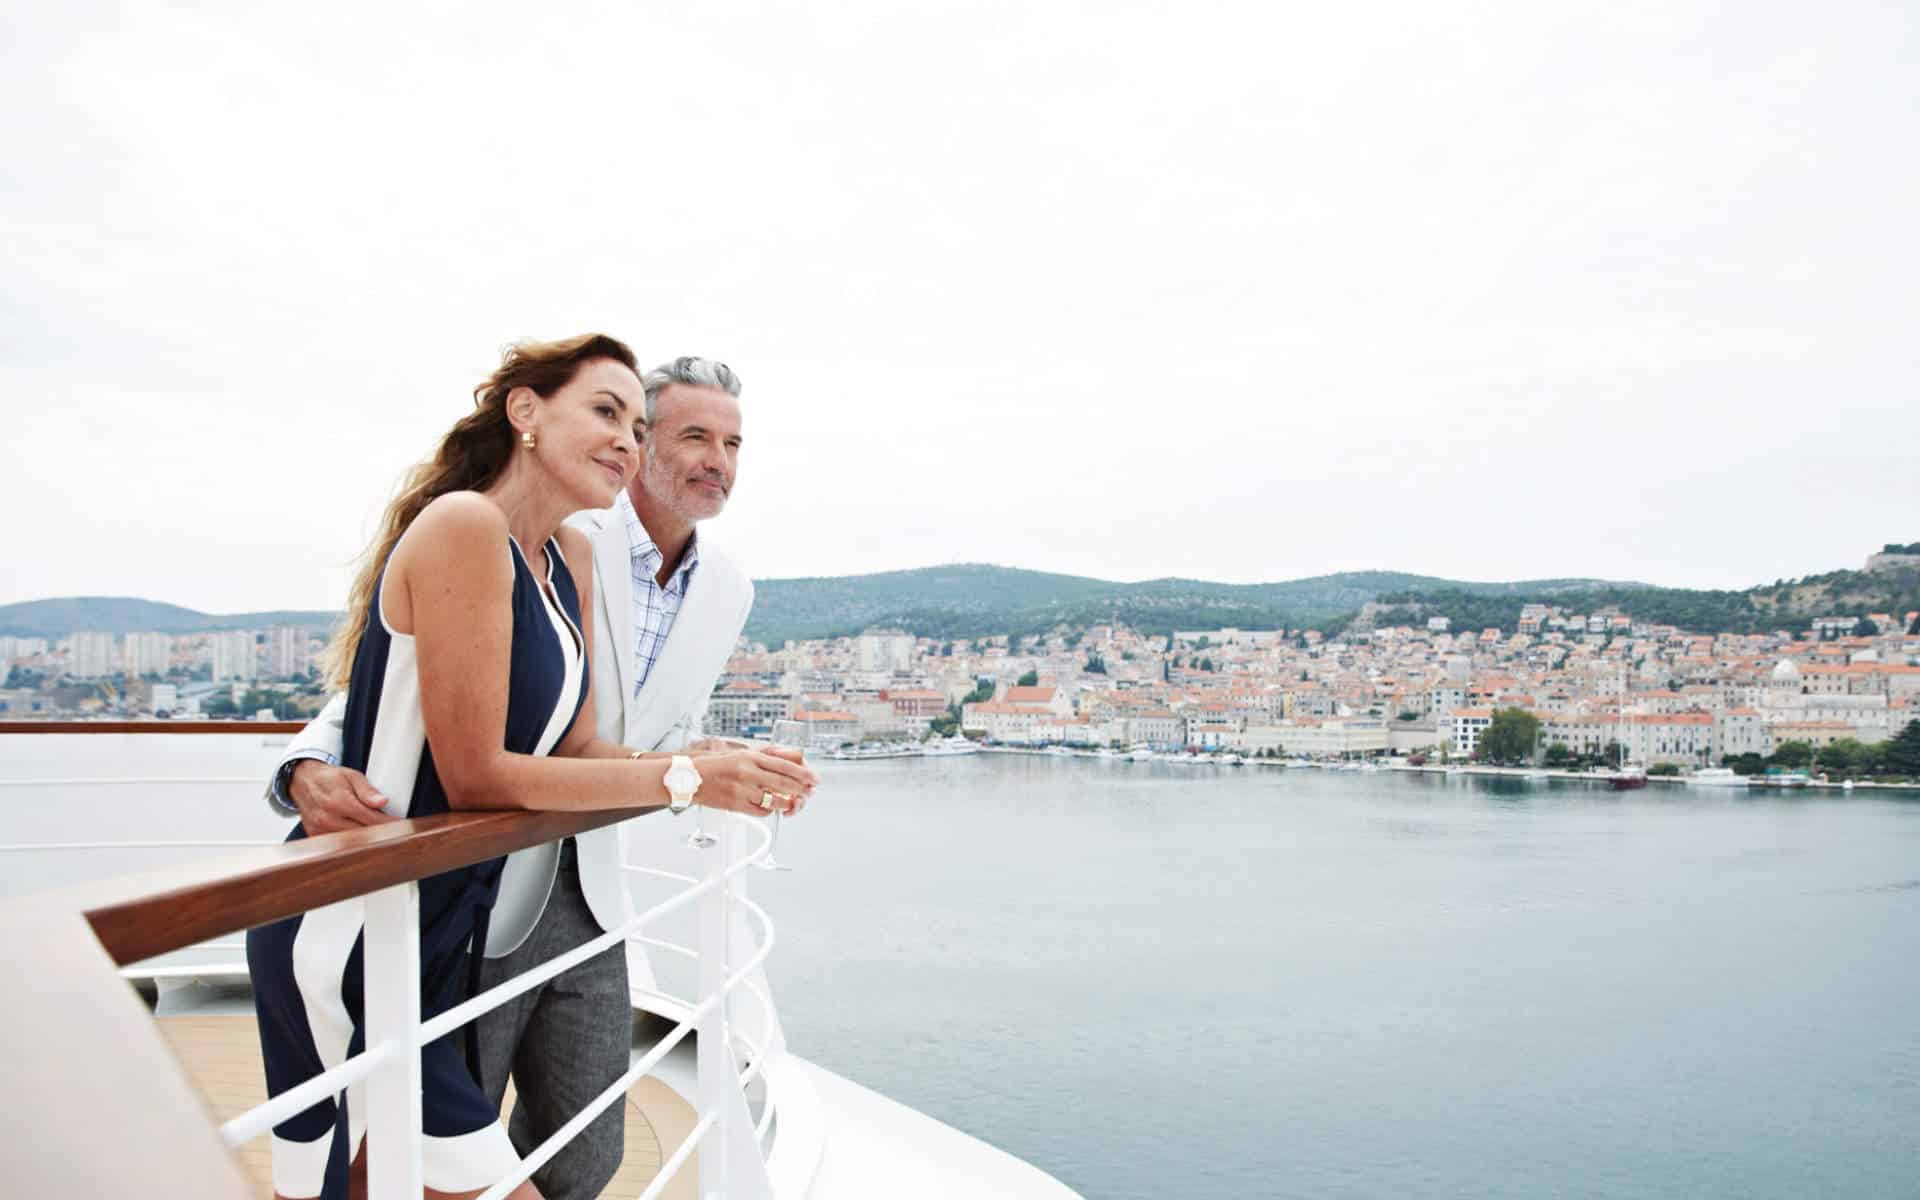 Seabourn guests can enjoy service enhancements.